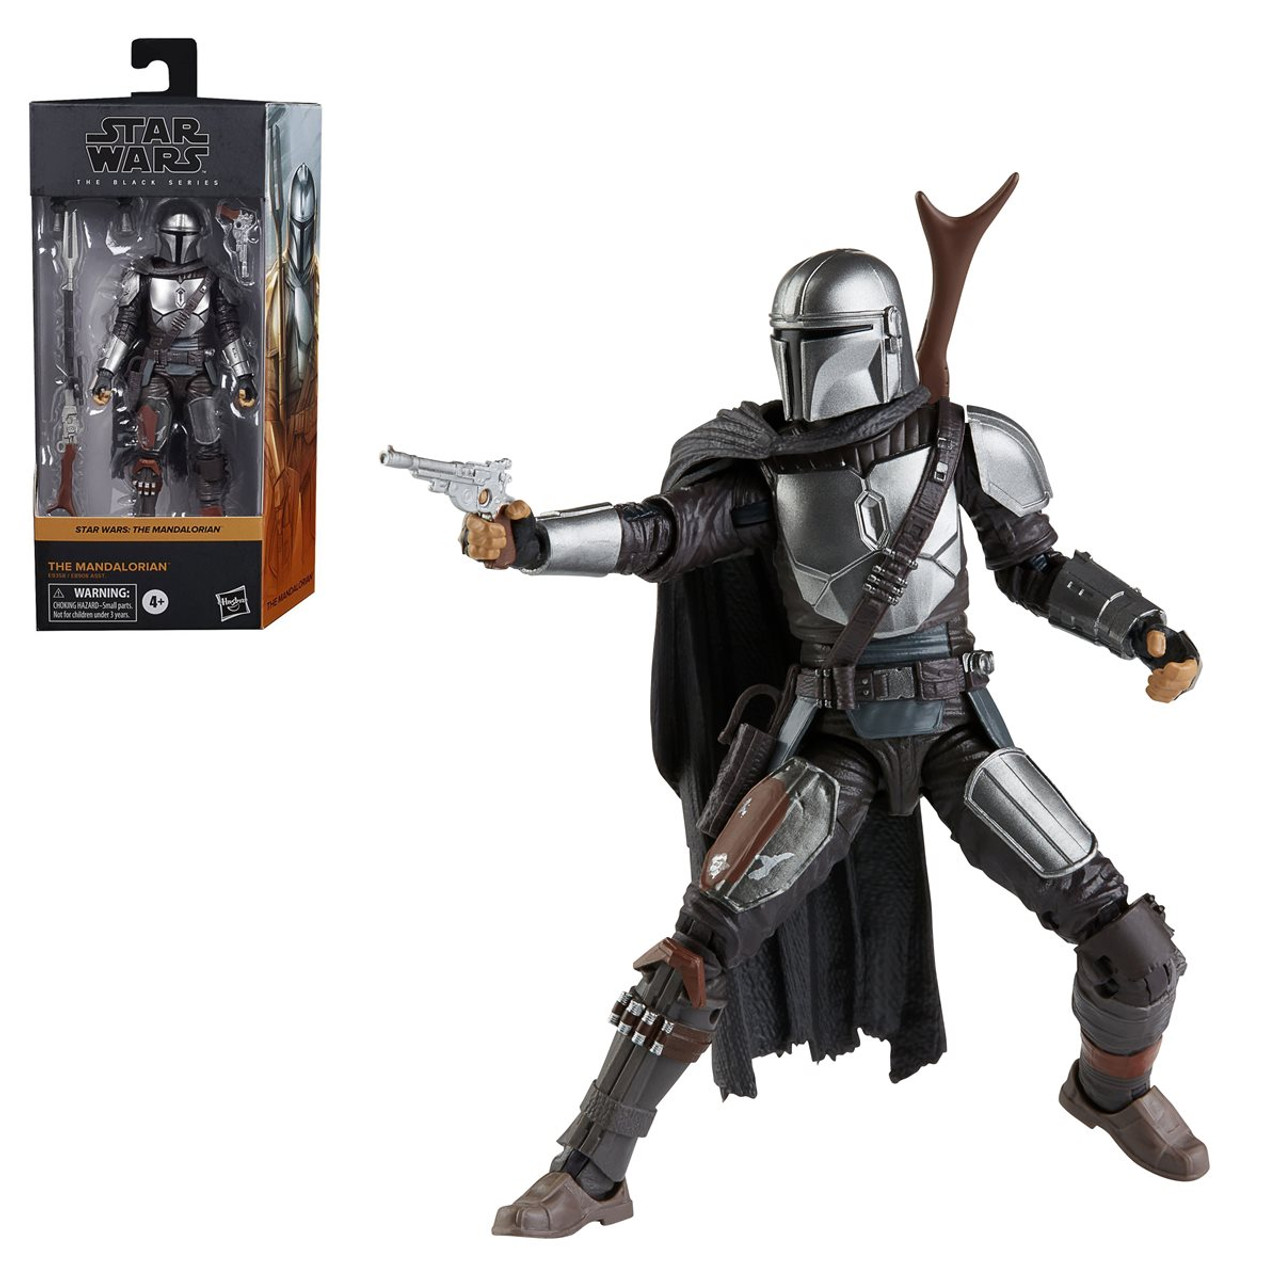 Hasbro Star Wars The Black Series Mandalorian The Armorer 6 Inch Action Figure for sale online 